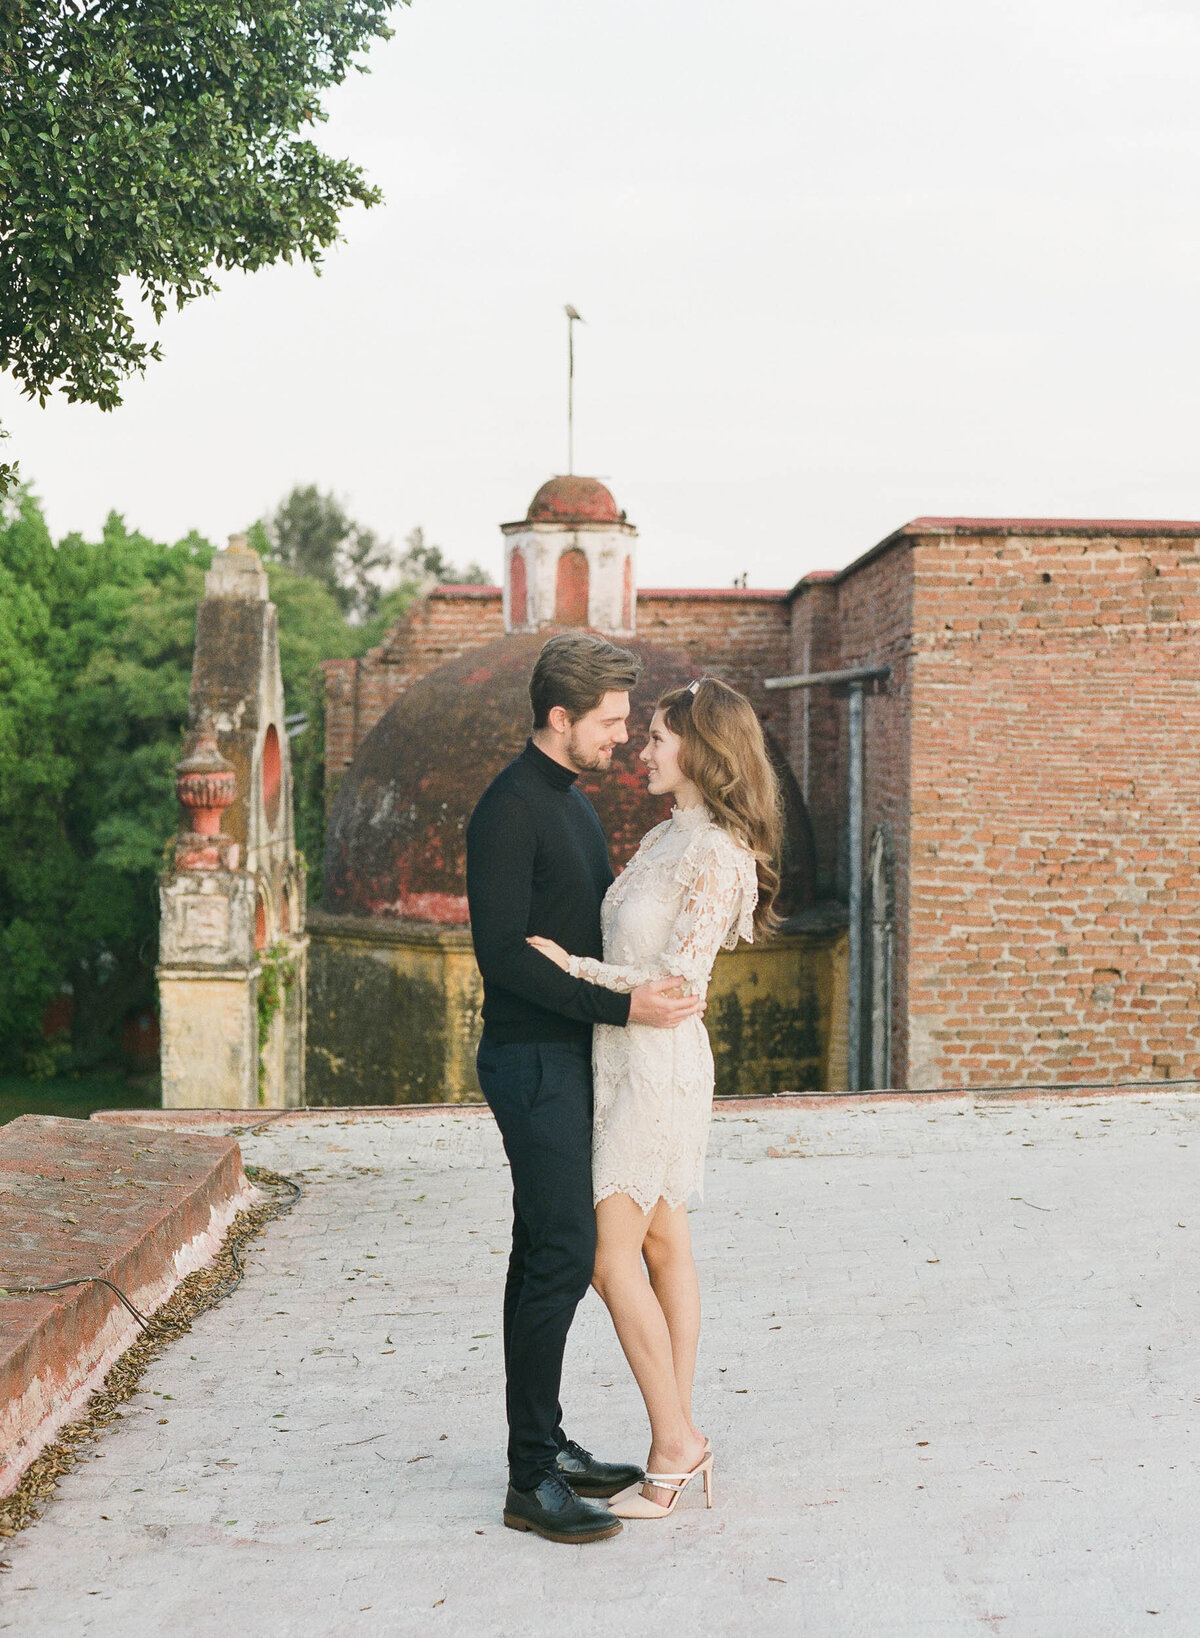 Alexandra-Vonk-photography-engagement-session-Mexico-14